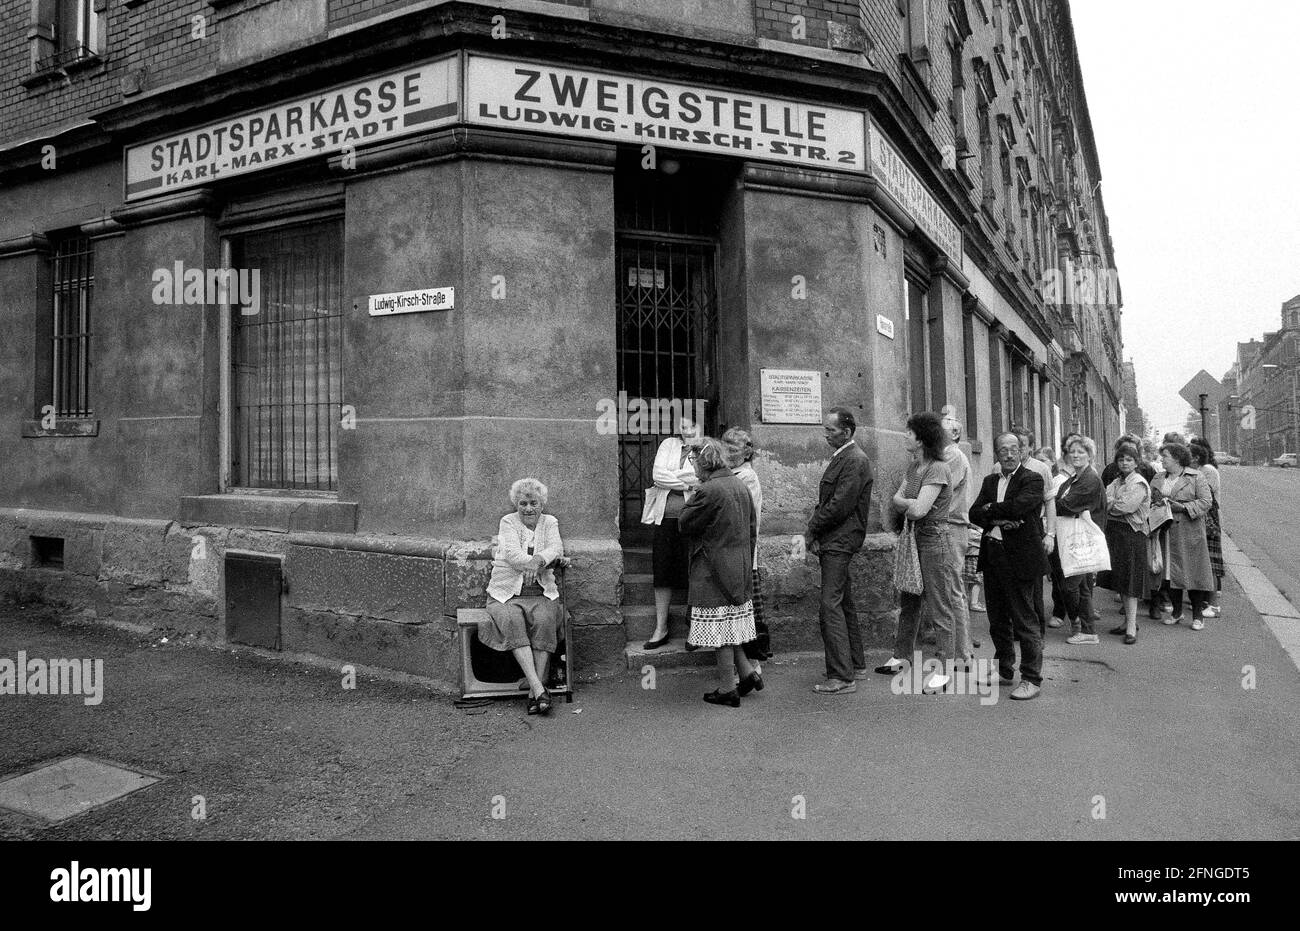 Saxony / GDR country / Early 1990 Karl-Marx-Stadt, Chemnitz Waiting in front of the city savings bank to hand in the application for money exchange. Every GDR citizen had to open an account if he wanted to have D-Mark in the middle of the year. // Unification / Banks / *** Local Caption *** East Germany / Unification / Communism / Queuing for West Mark in Karl Marx City. An old woman is waiting on a junk TV device. Every East German had to open an account to get west German money. Here people are registering. The city was renamed to Chemnitz again in 1990. [automated translation] Stock Photo